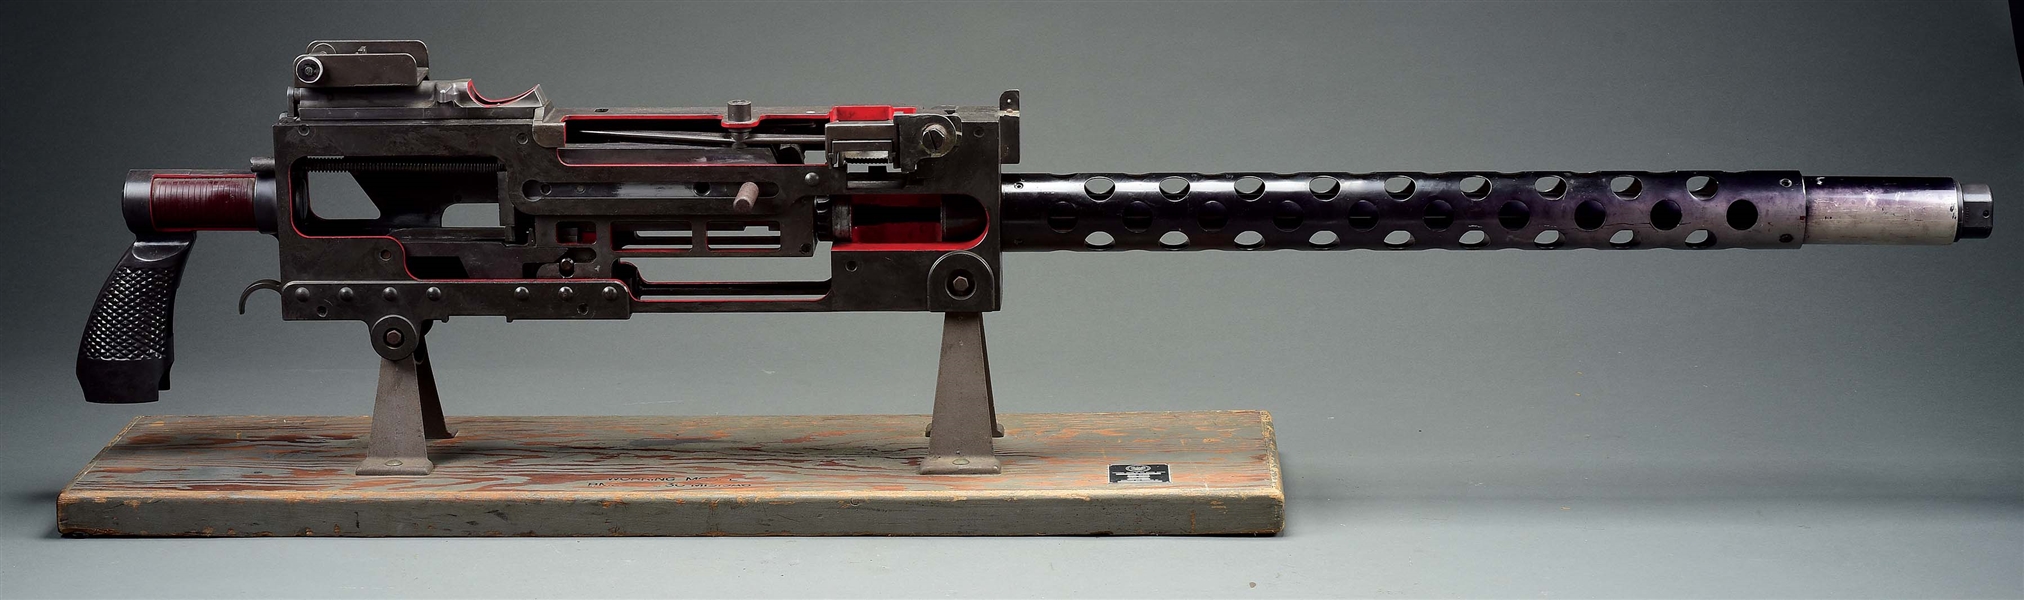 GIANT SIZE BROWNING MODEL 1919A6 MACHINE GUN TRAINING AID.